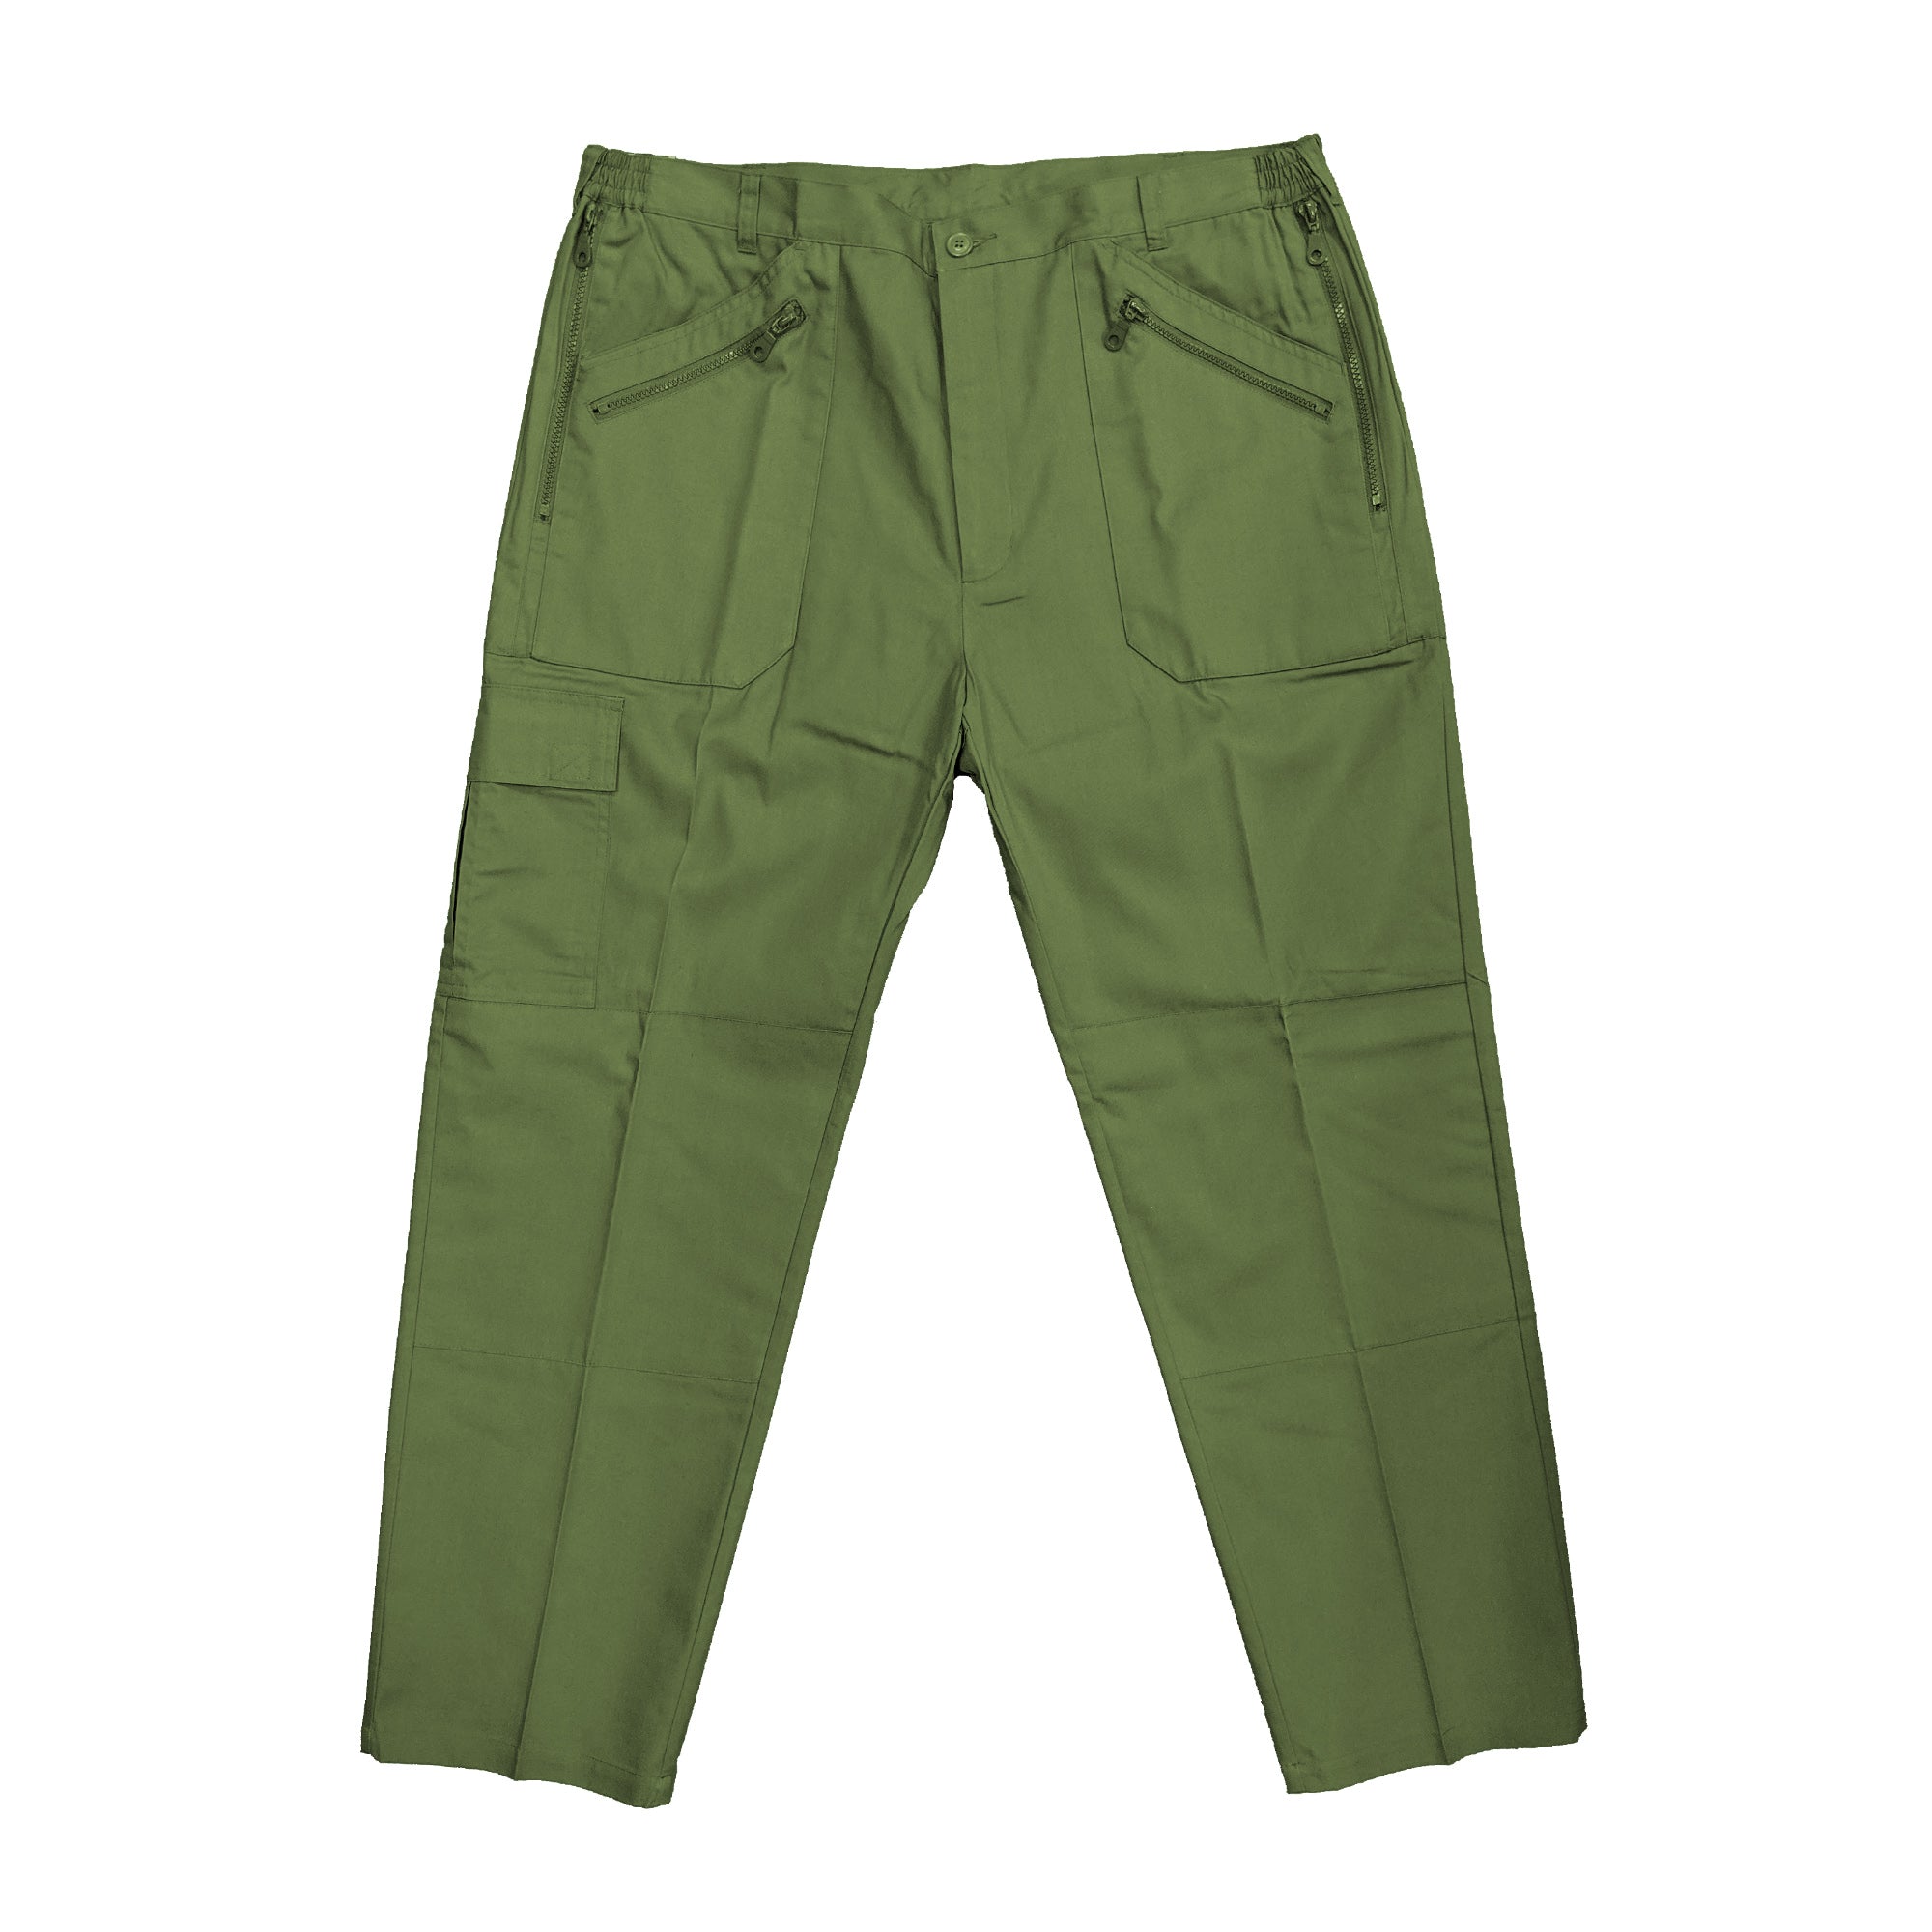 Carabou Action Trousers - GAC - Moss 1